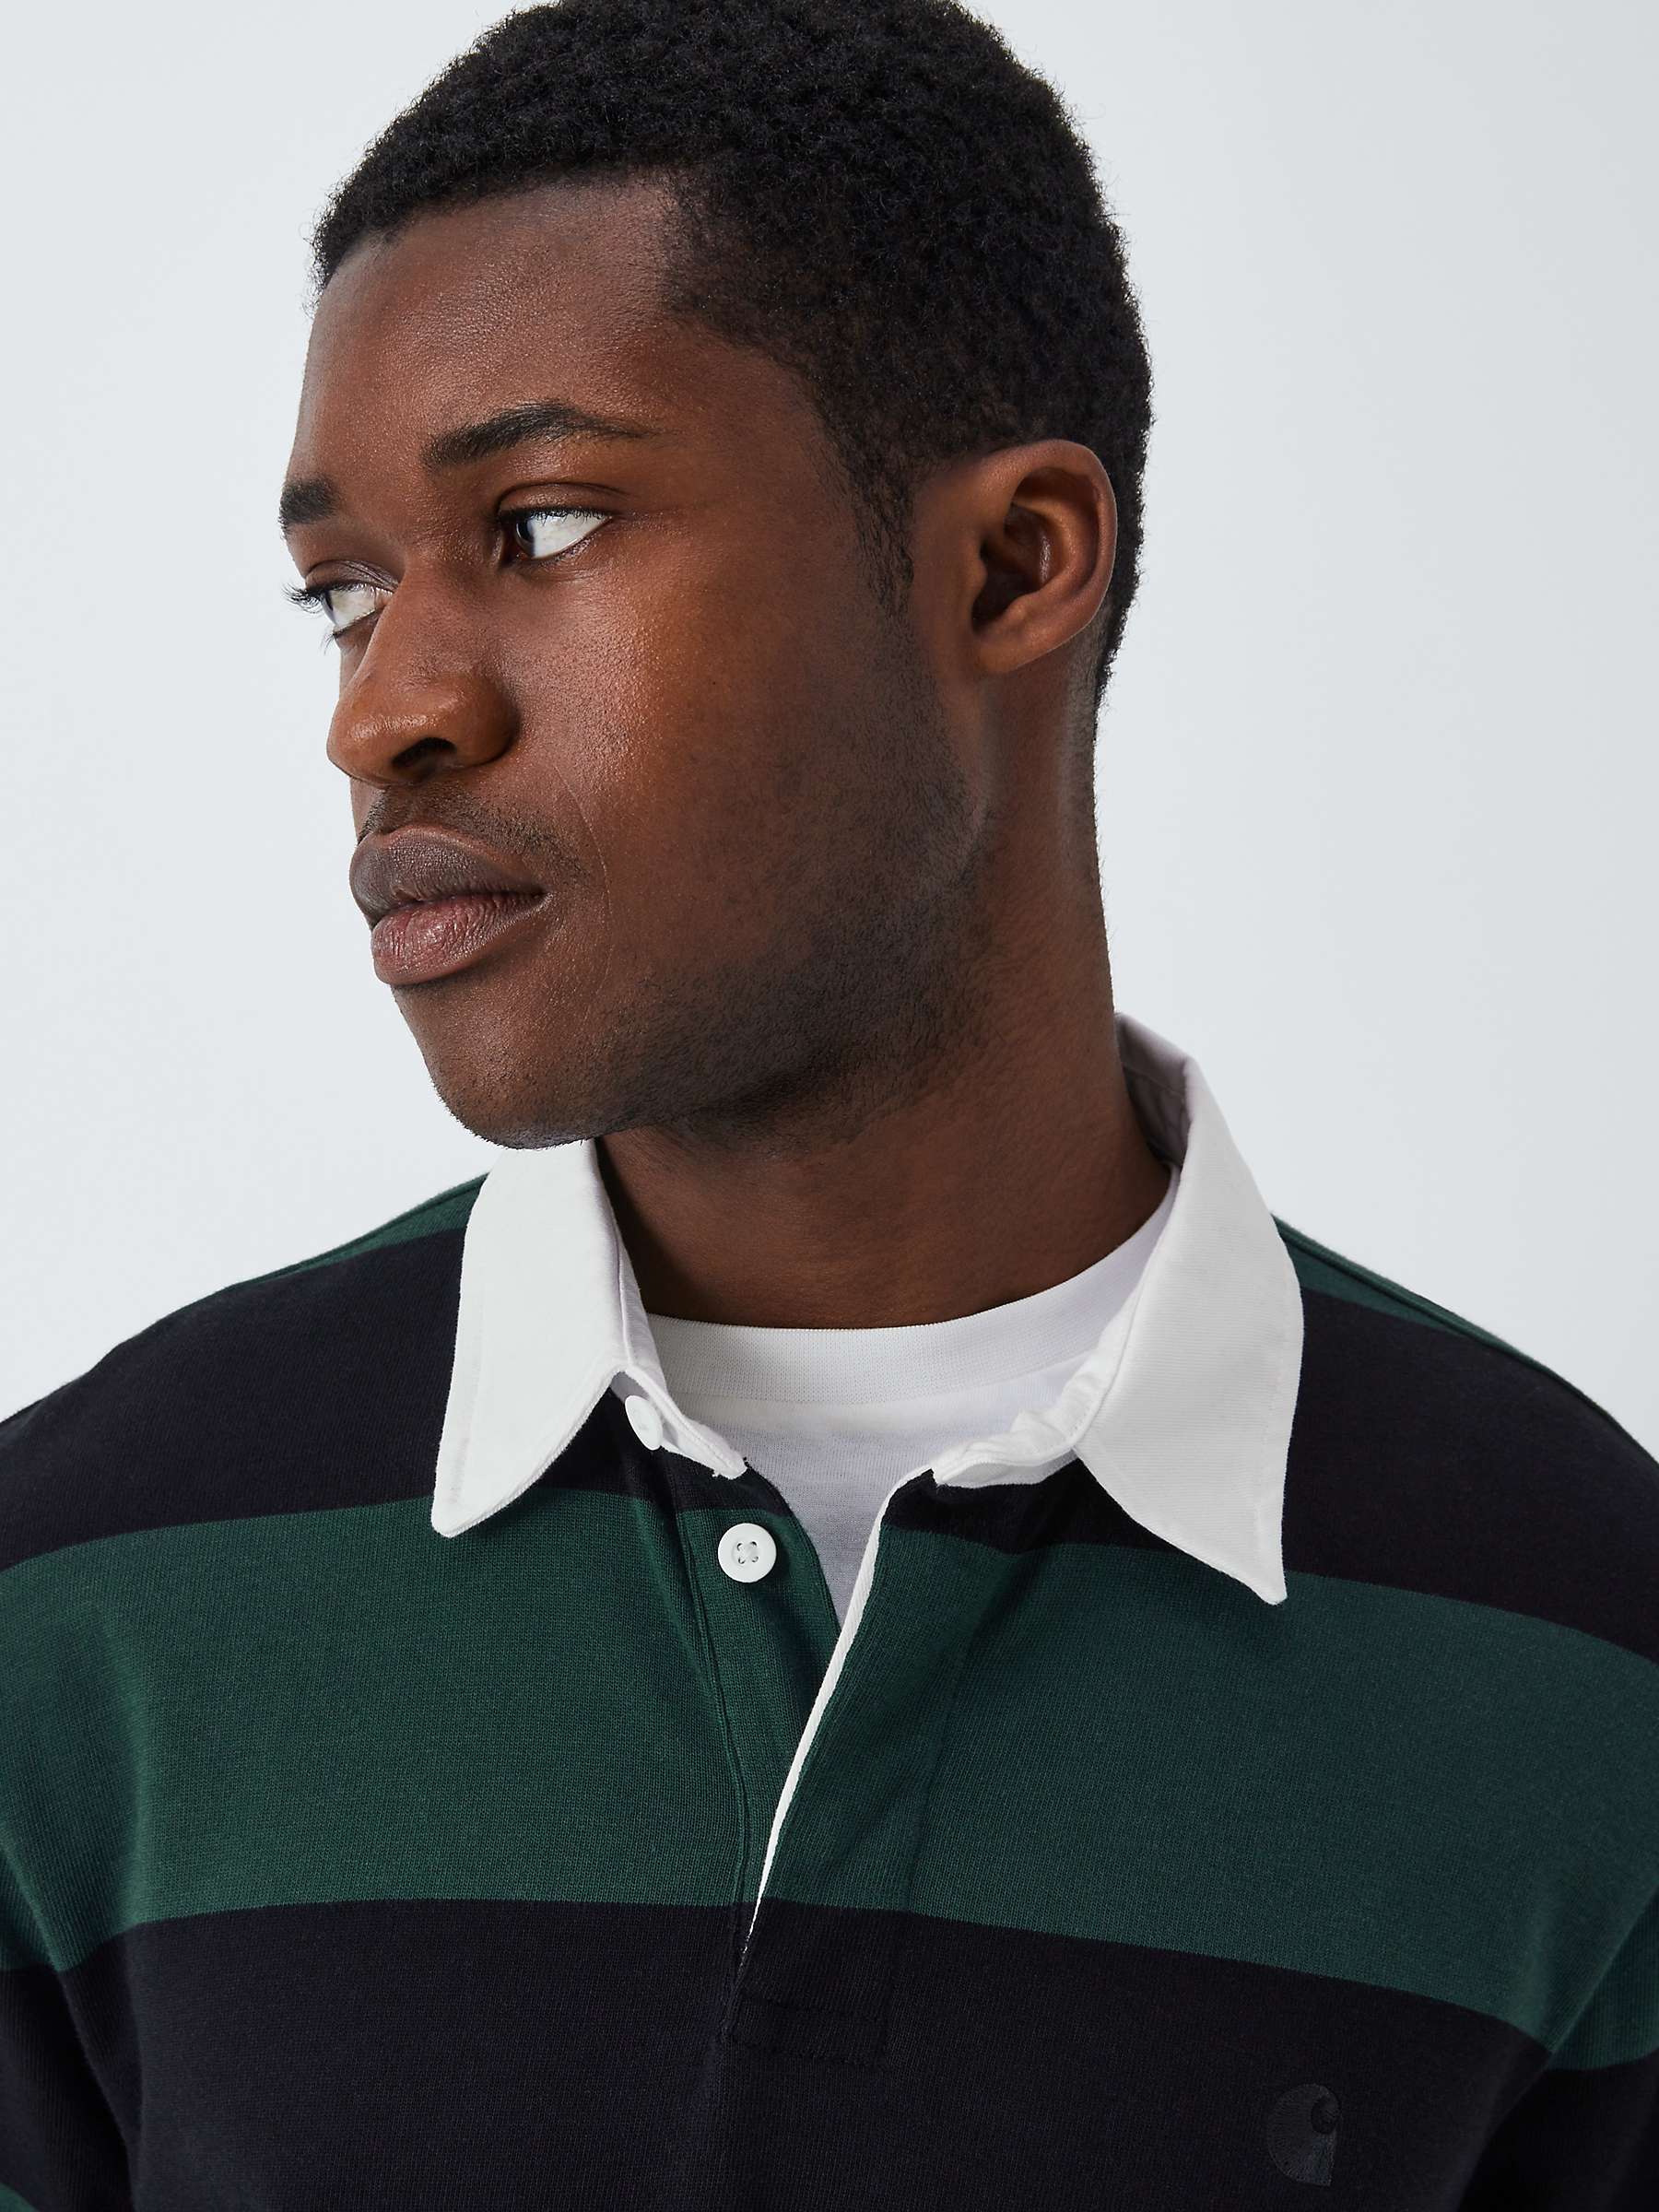 Buy Carhartt WIP Swenson Long Sleeve Rugby Shirt, Green/Navy Online at johnlewis.com